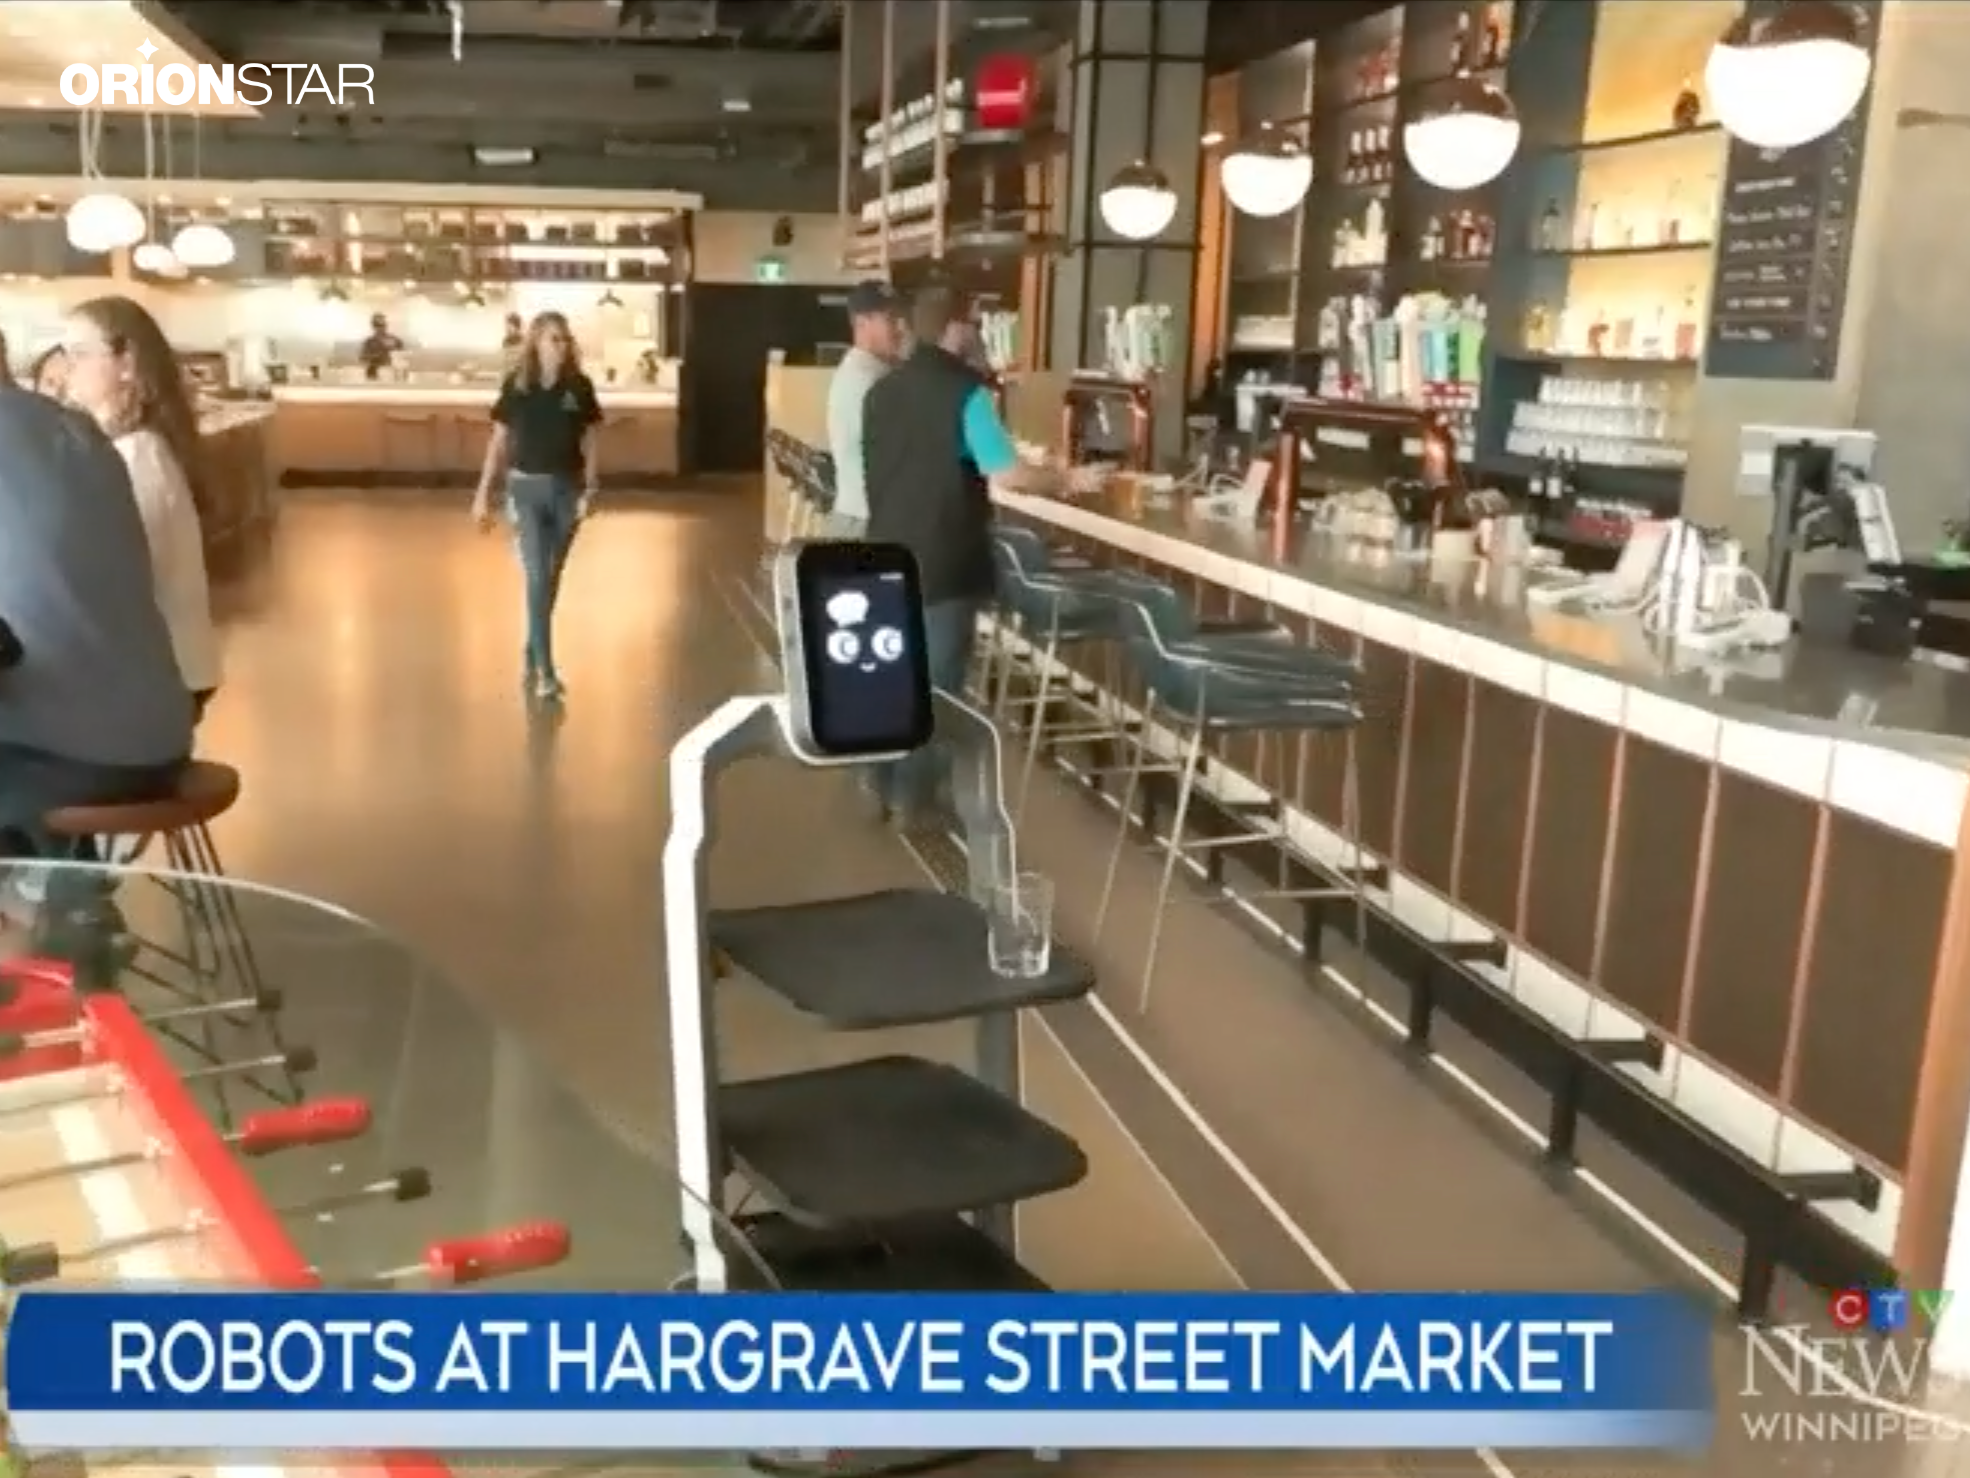 OrionStar Robots Enhance the Dining Experience at Mottola Grocery Restaurant in Winnipeg